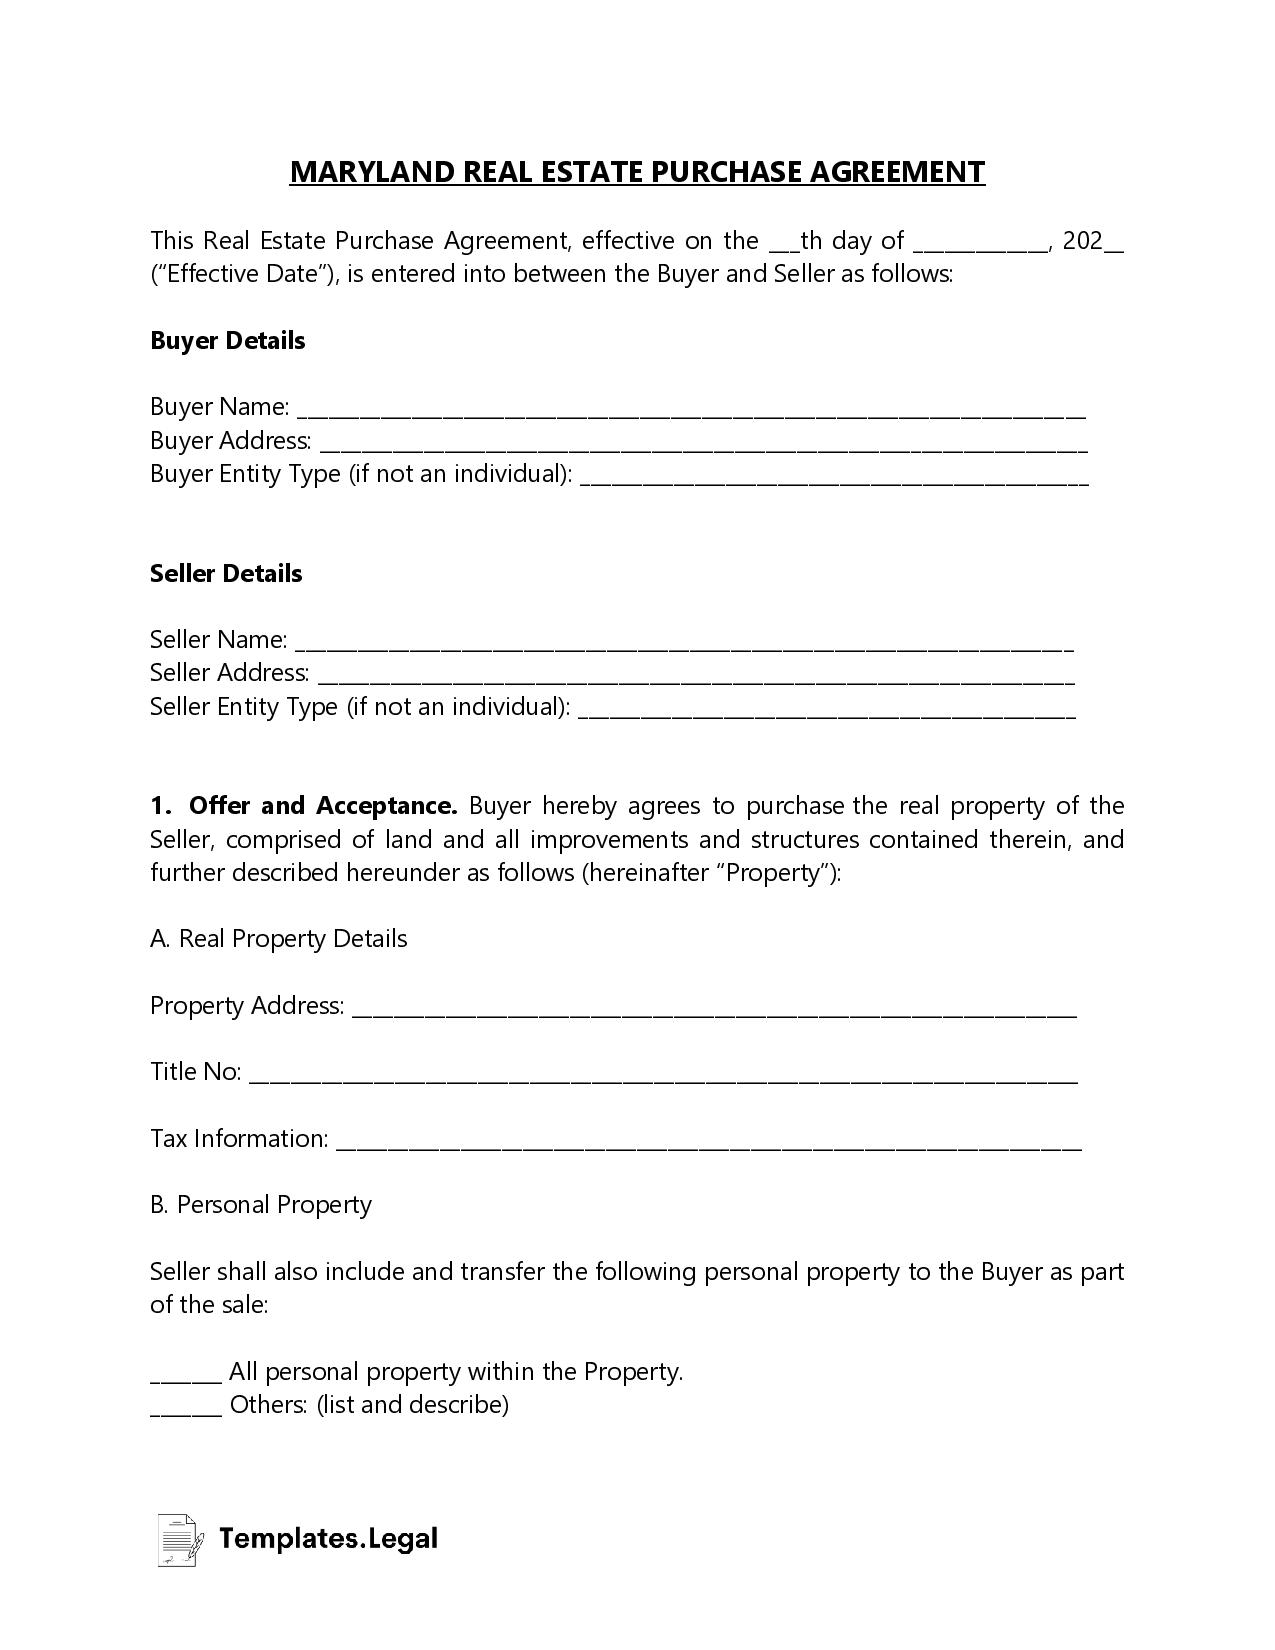 Maryland Real Estate Purchase Agreement - Templates.Legal